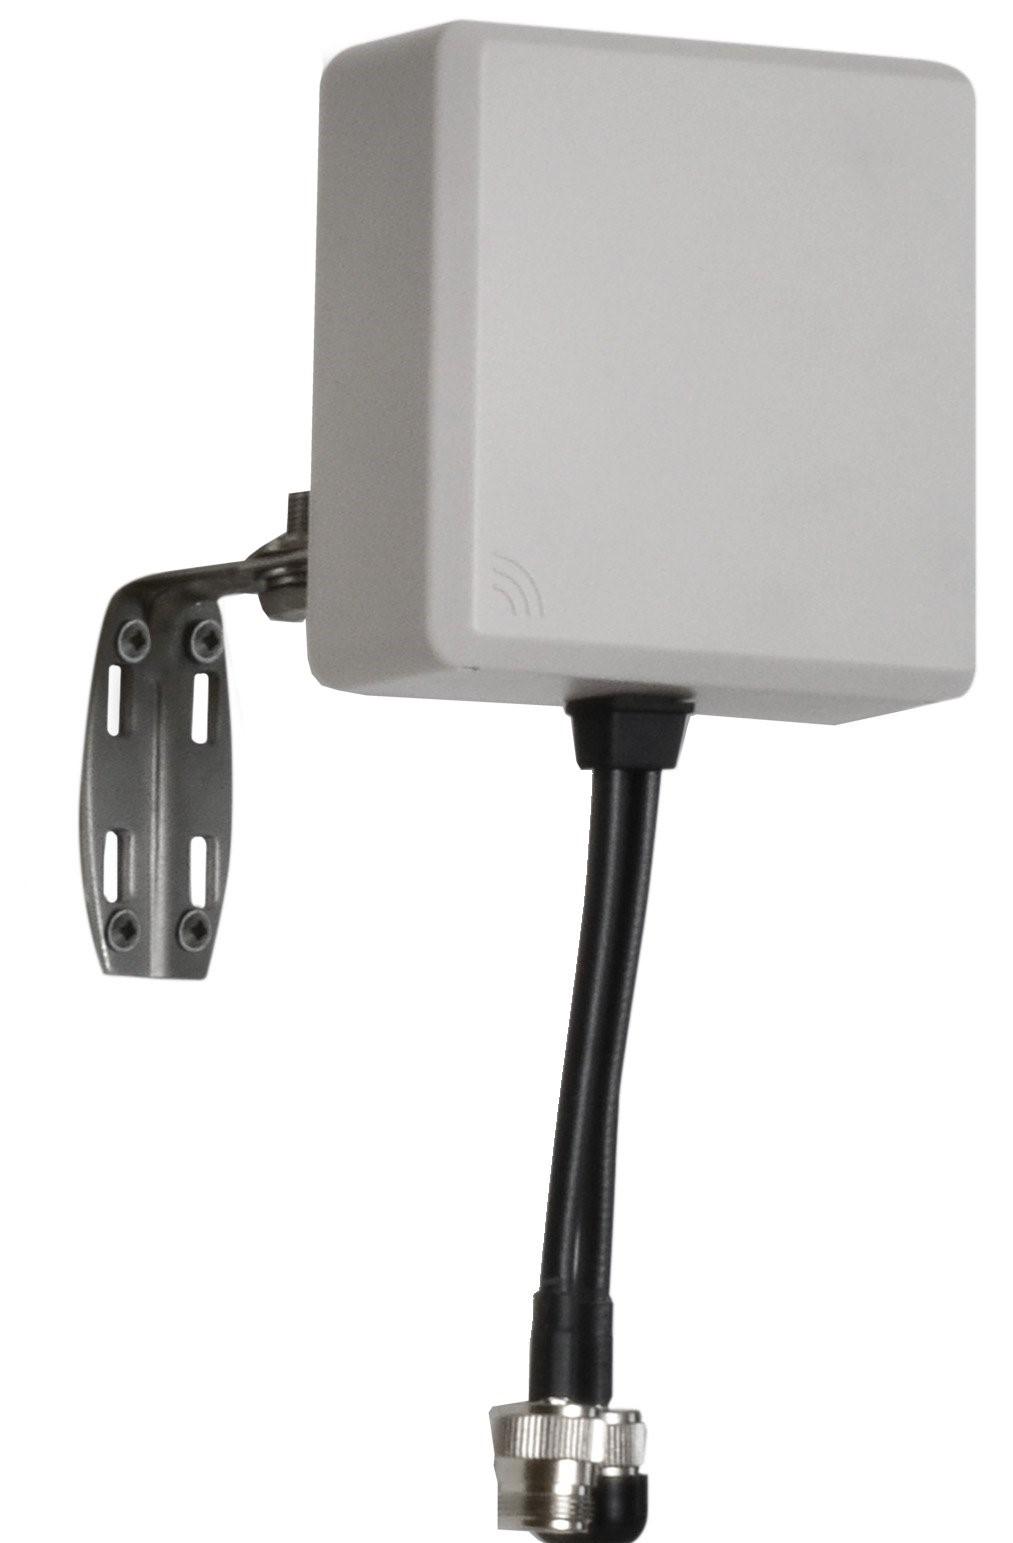 ANT-N-11-5G-dualpol for 802.11ac/n Bridge Links Order number: 5500001542 This 5 GHz Dual Polarization antenna is suitable for directional links in combination with 802.